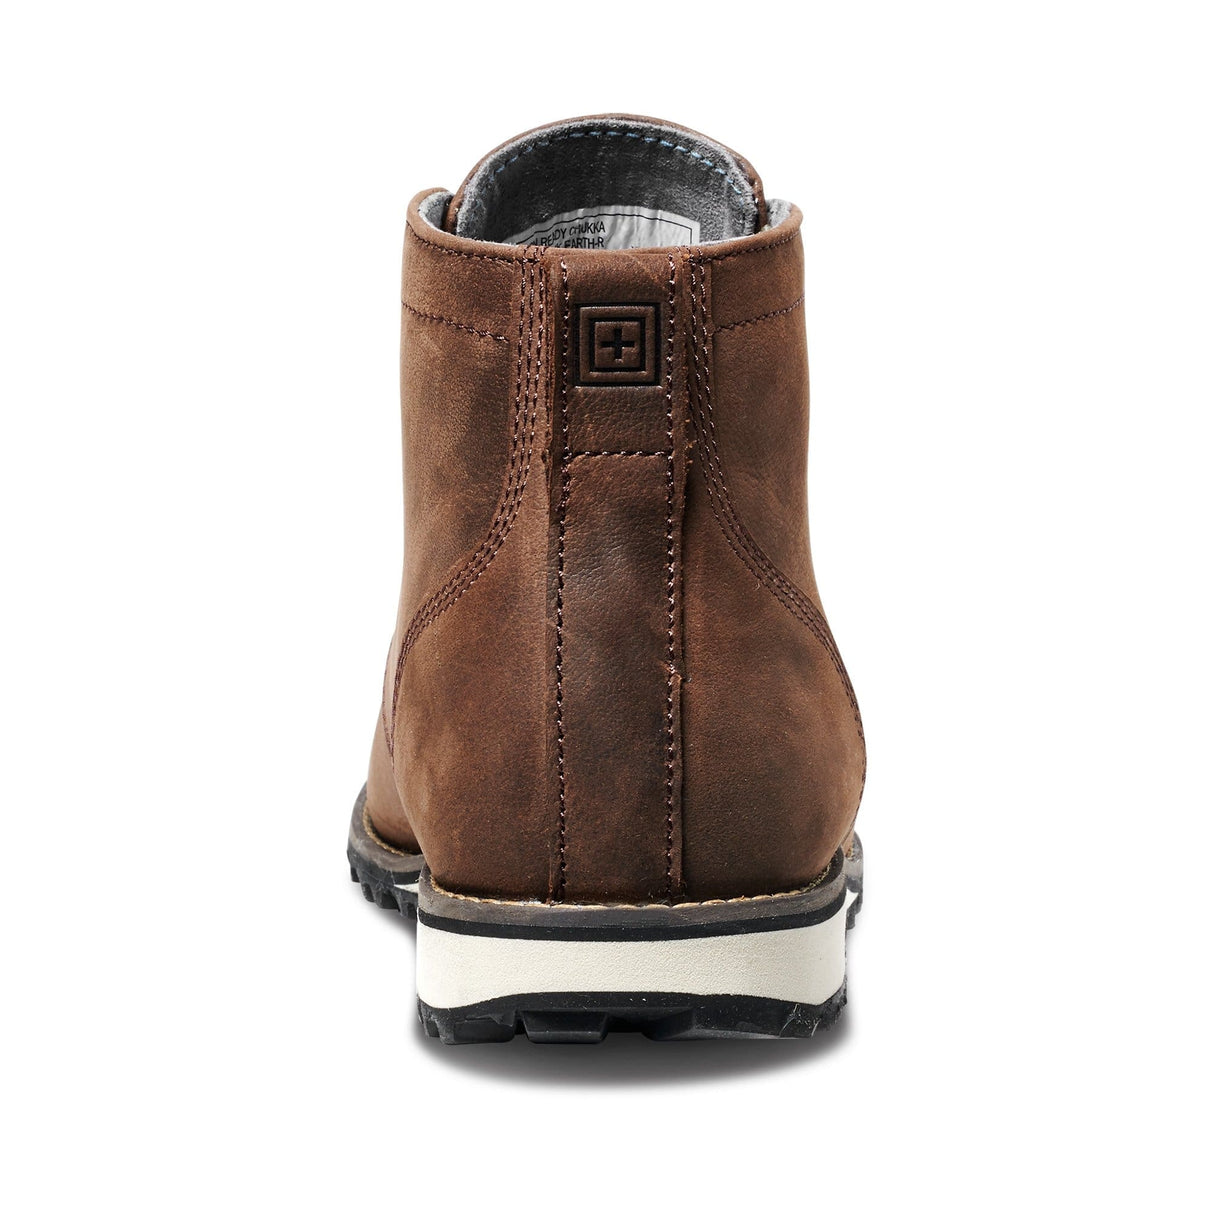 MISSION READY CHUKKA - 5.11 Tactical Finland